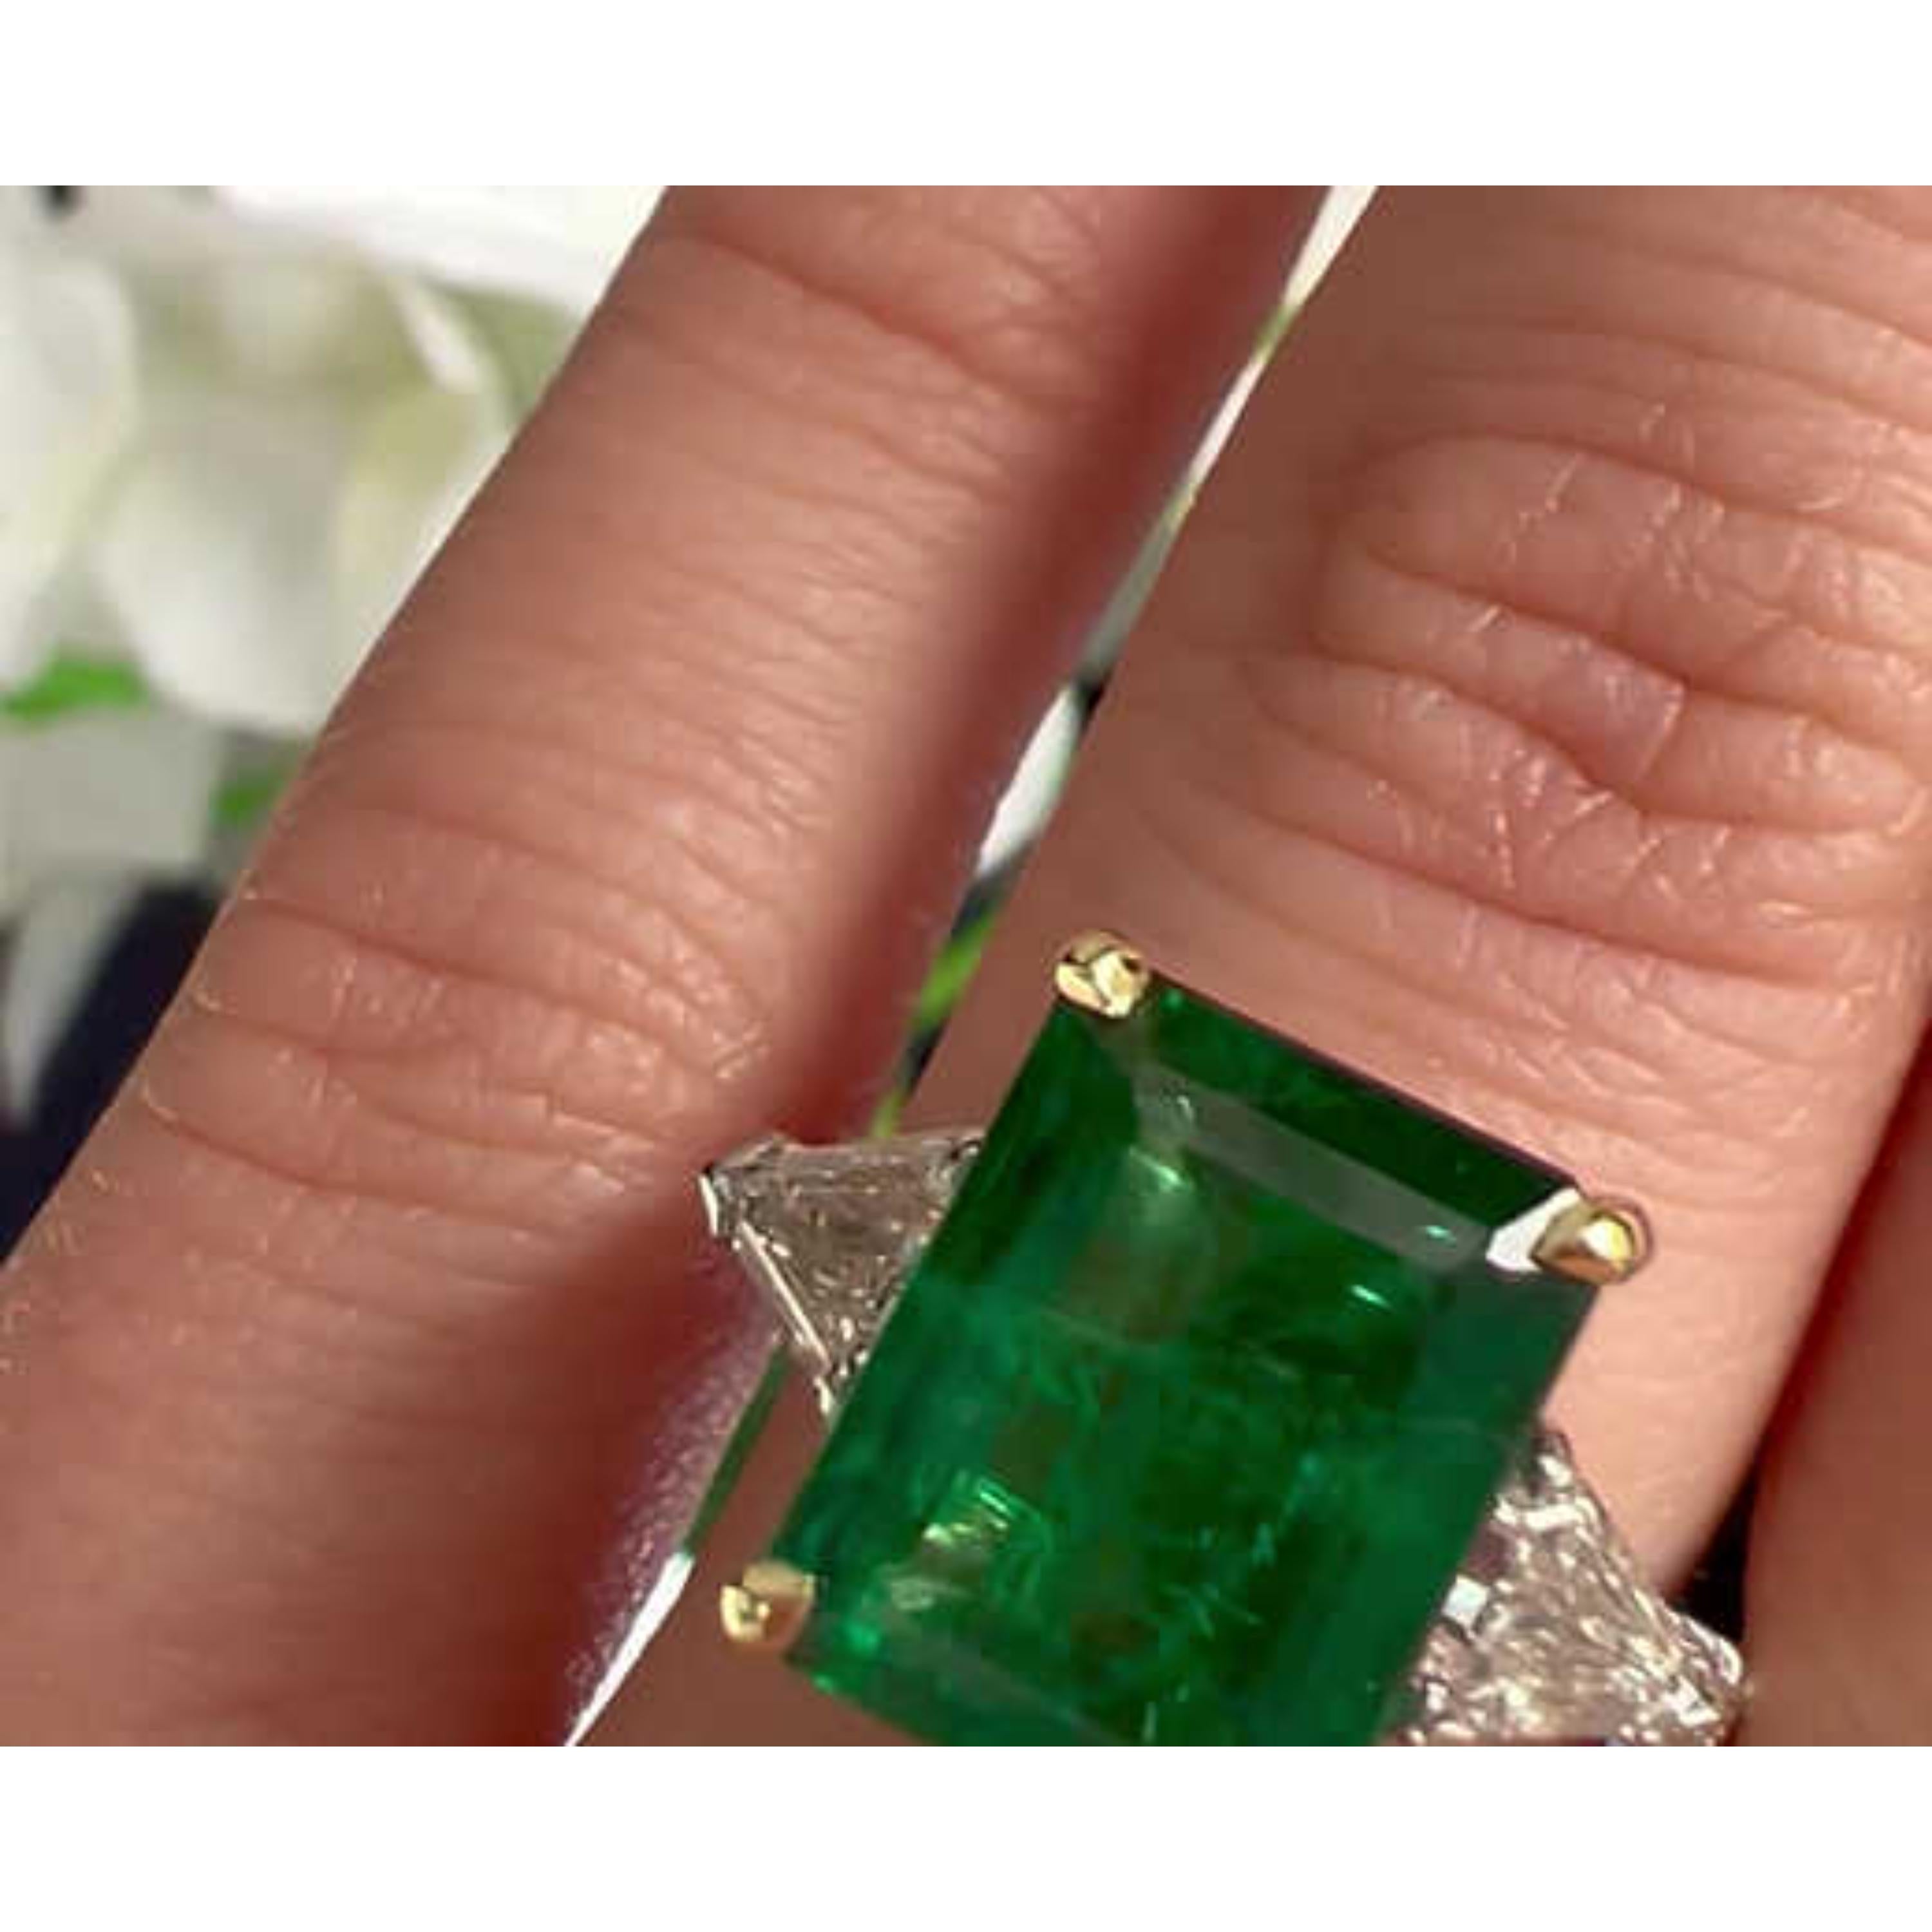 For Sale:  5 Carat Natural Emerald Diamond Engagement Ring Set in 18K Gold, Cocktail Ring 3